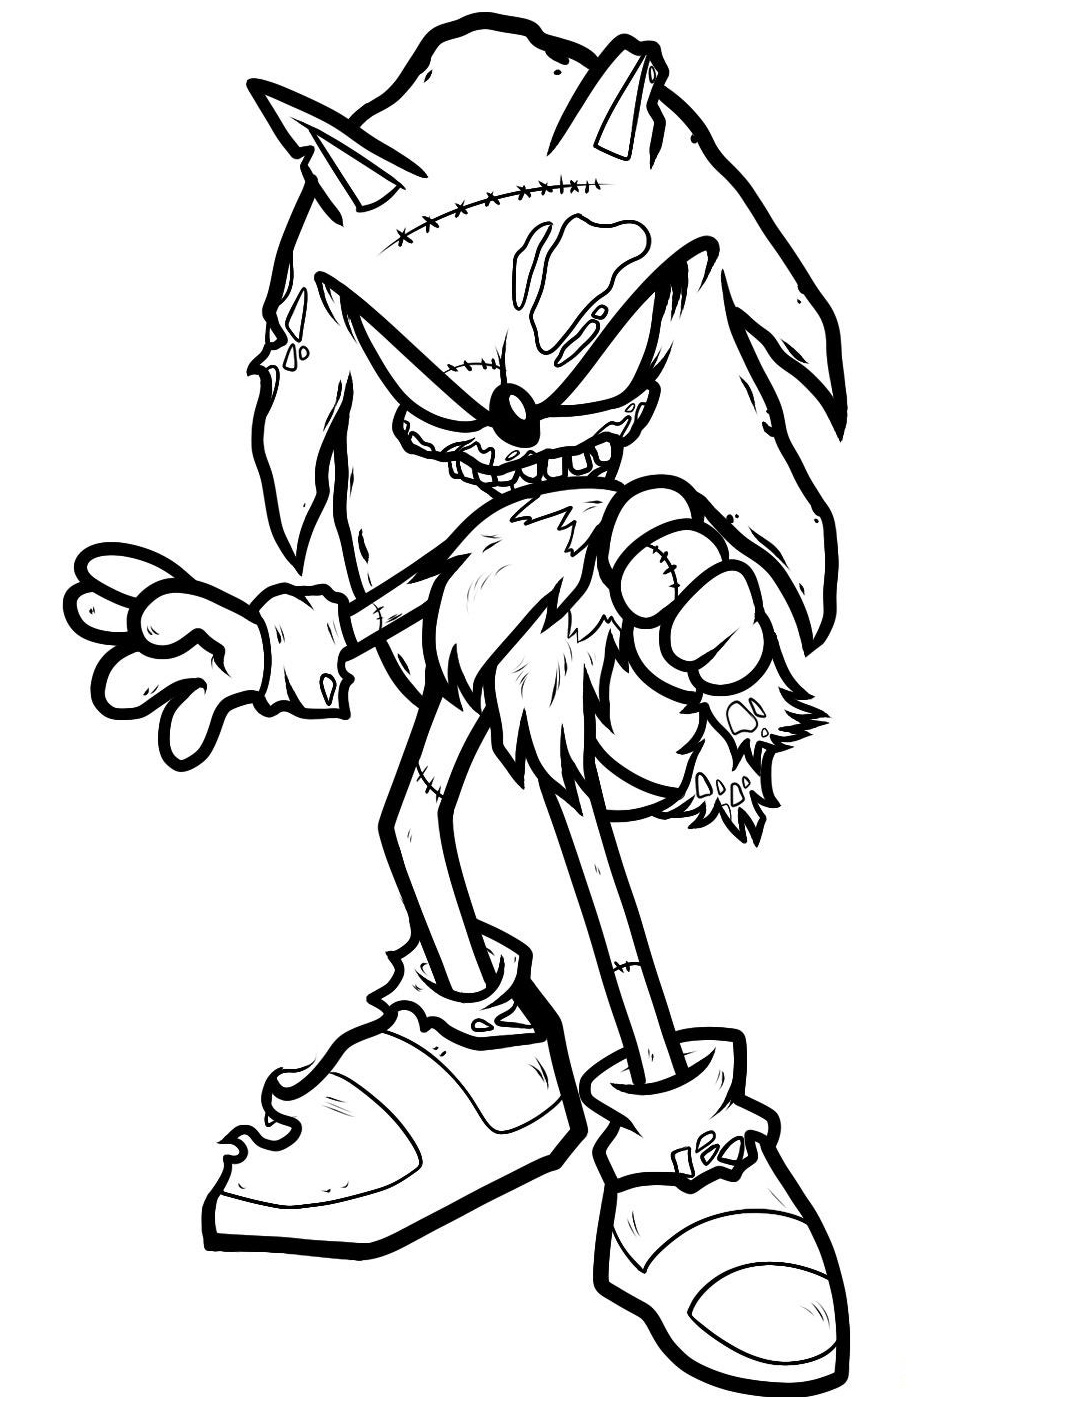 Featured image of post Evil Sonic The Hedgehog Coloring Pages Evil sonic the hedgehog coloring pages angry sonic